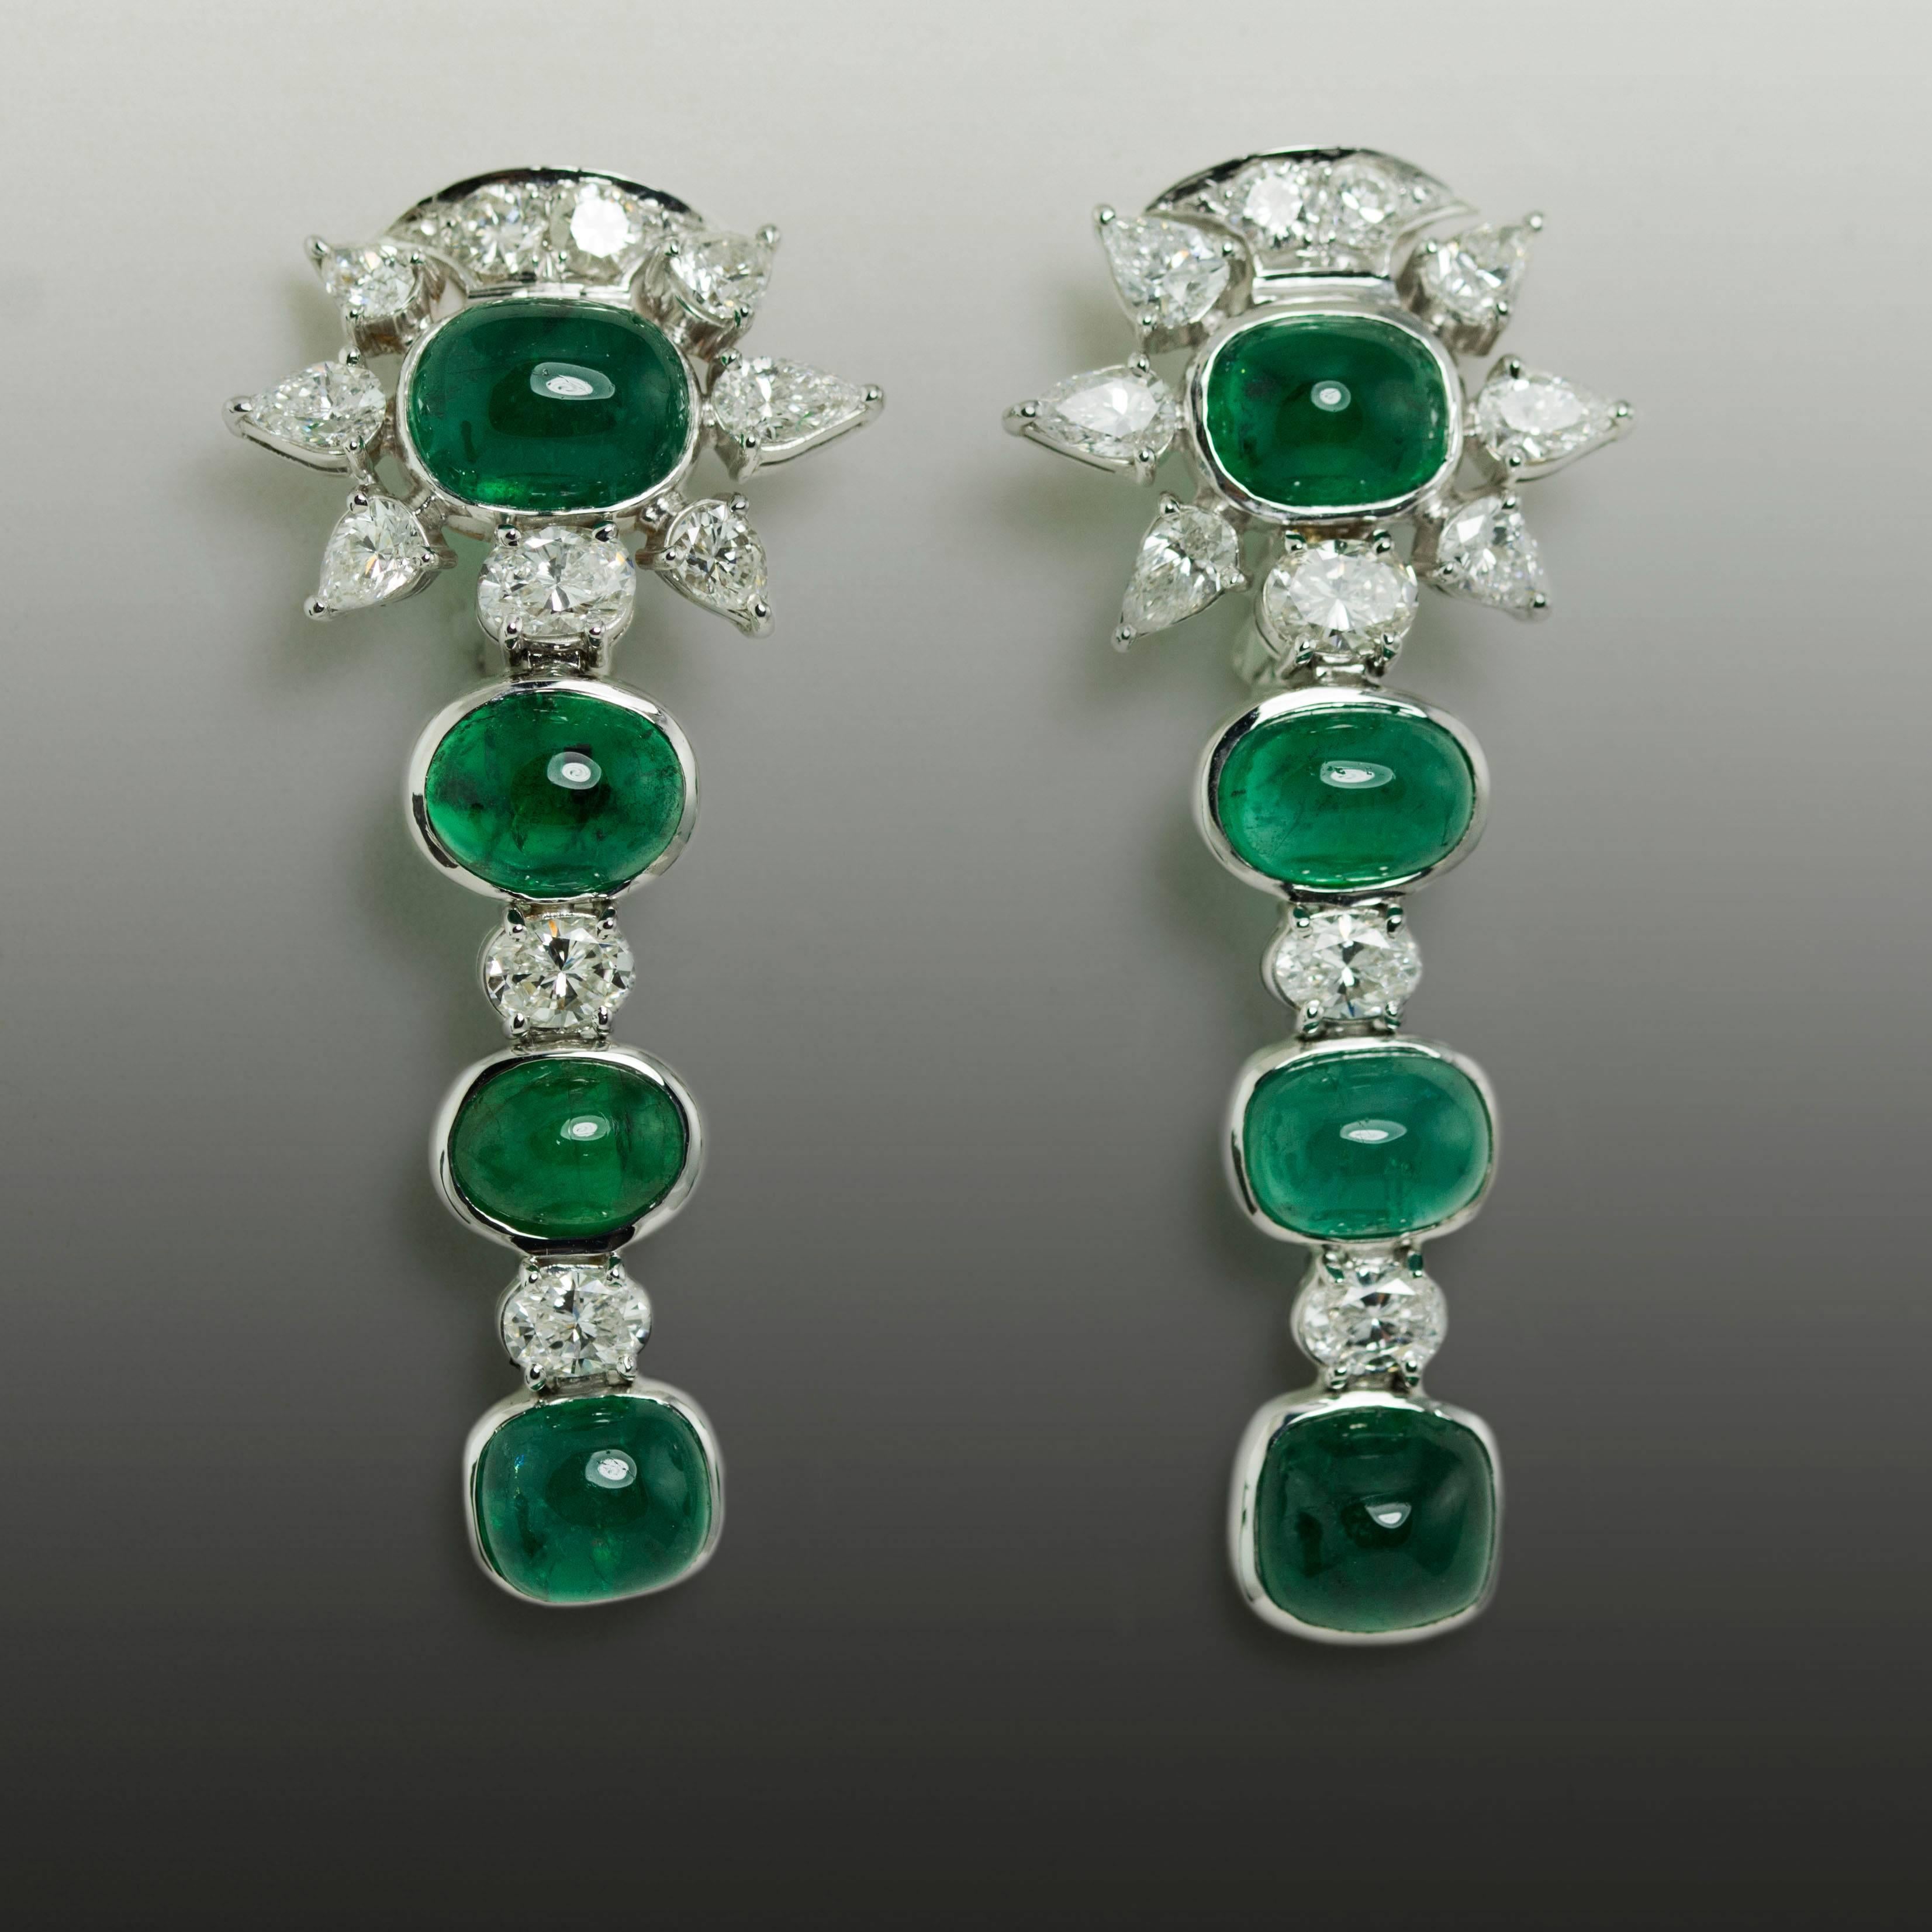 18k White gold earrings with 8 cabochon emeralds weighing 18.75 carats and 22 round brilliant, pear shape and oval diamonds weighing 4.09 carats.